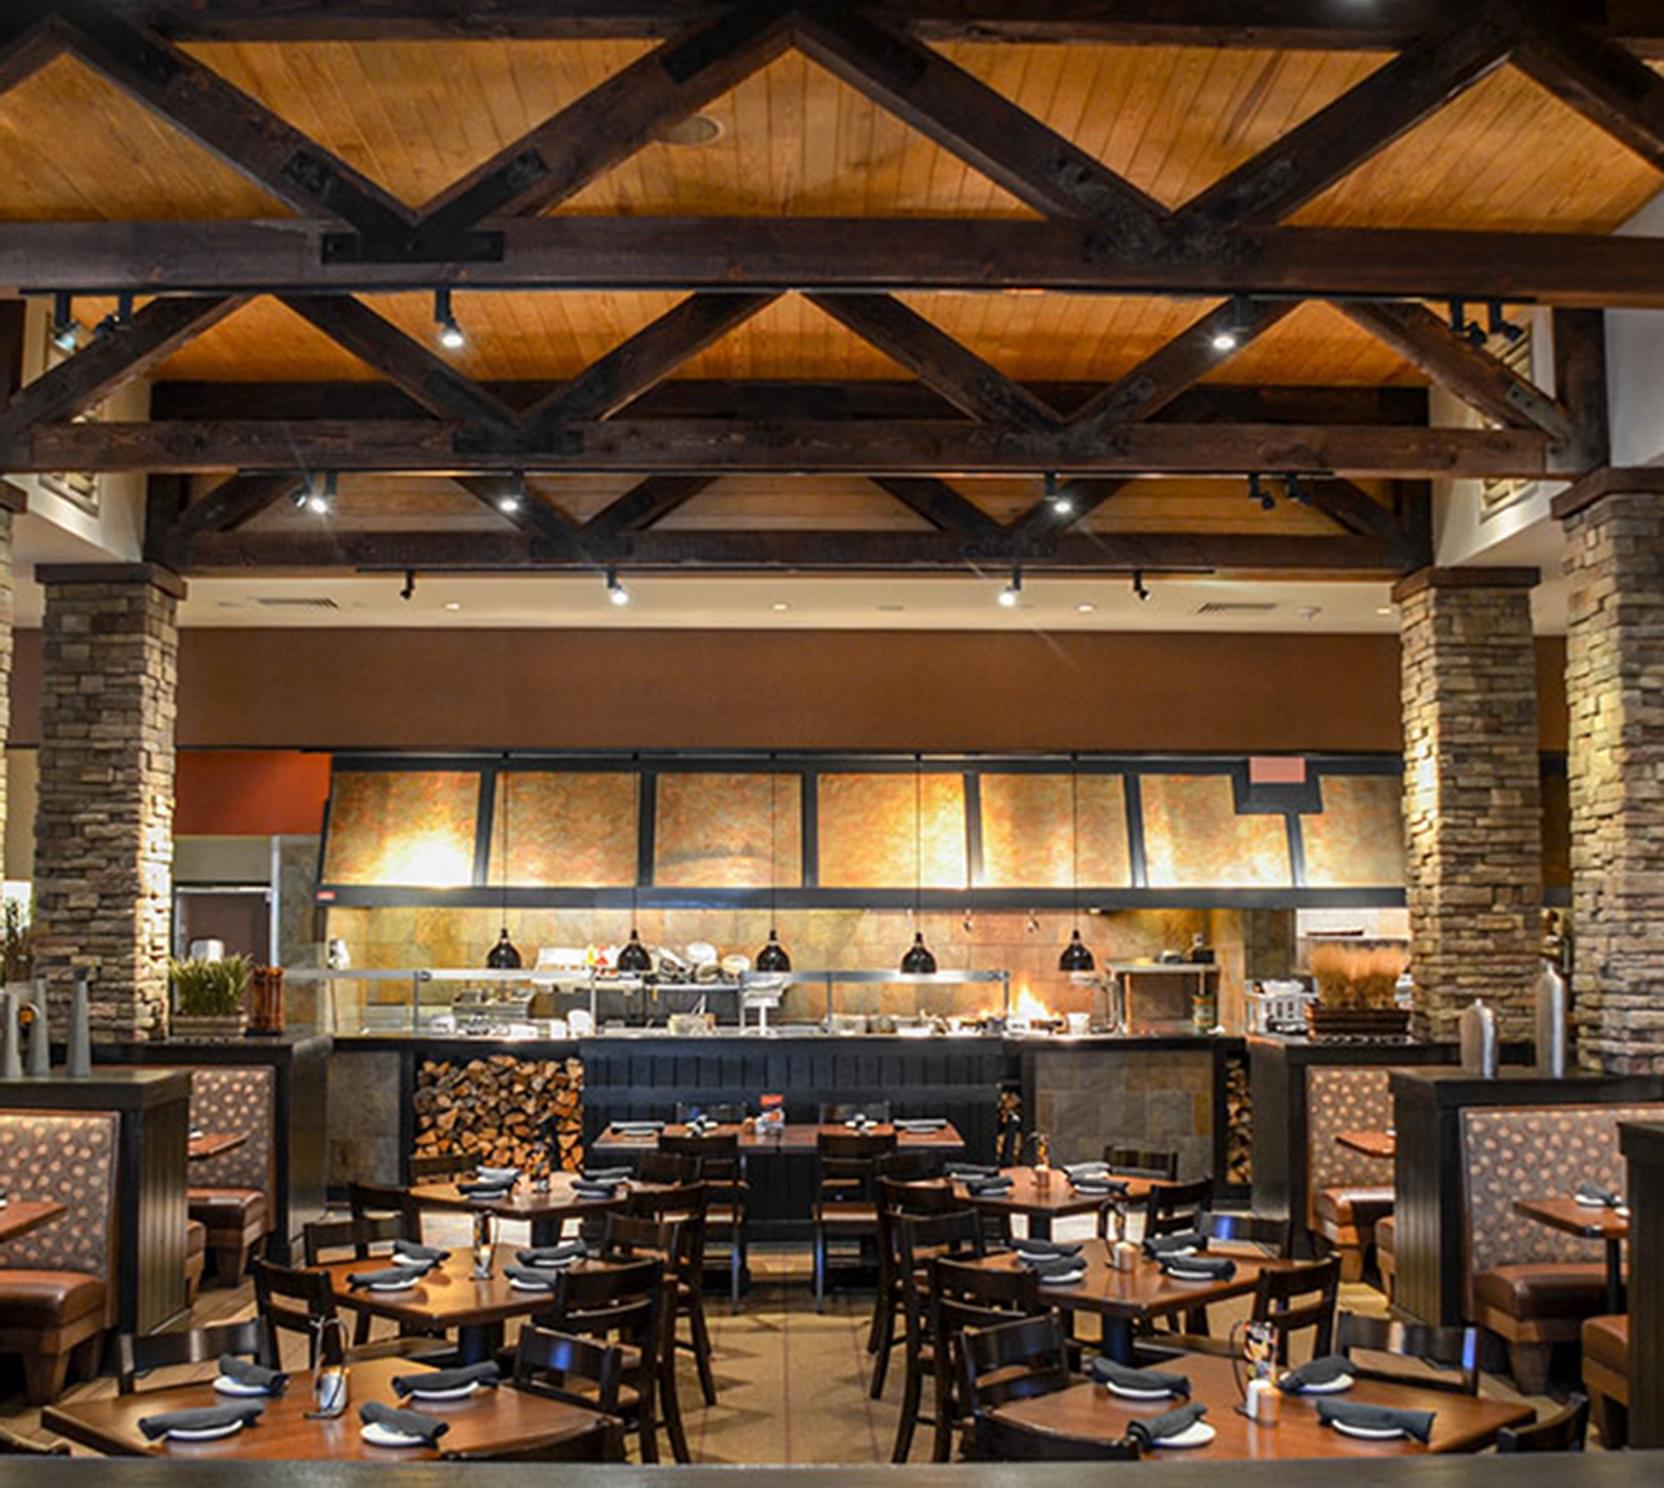 Interior of the Northlake Firebirds Wood Fired Grill in Charlotte, NC